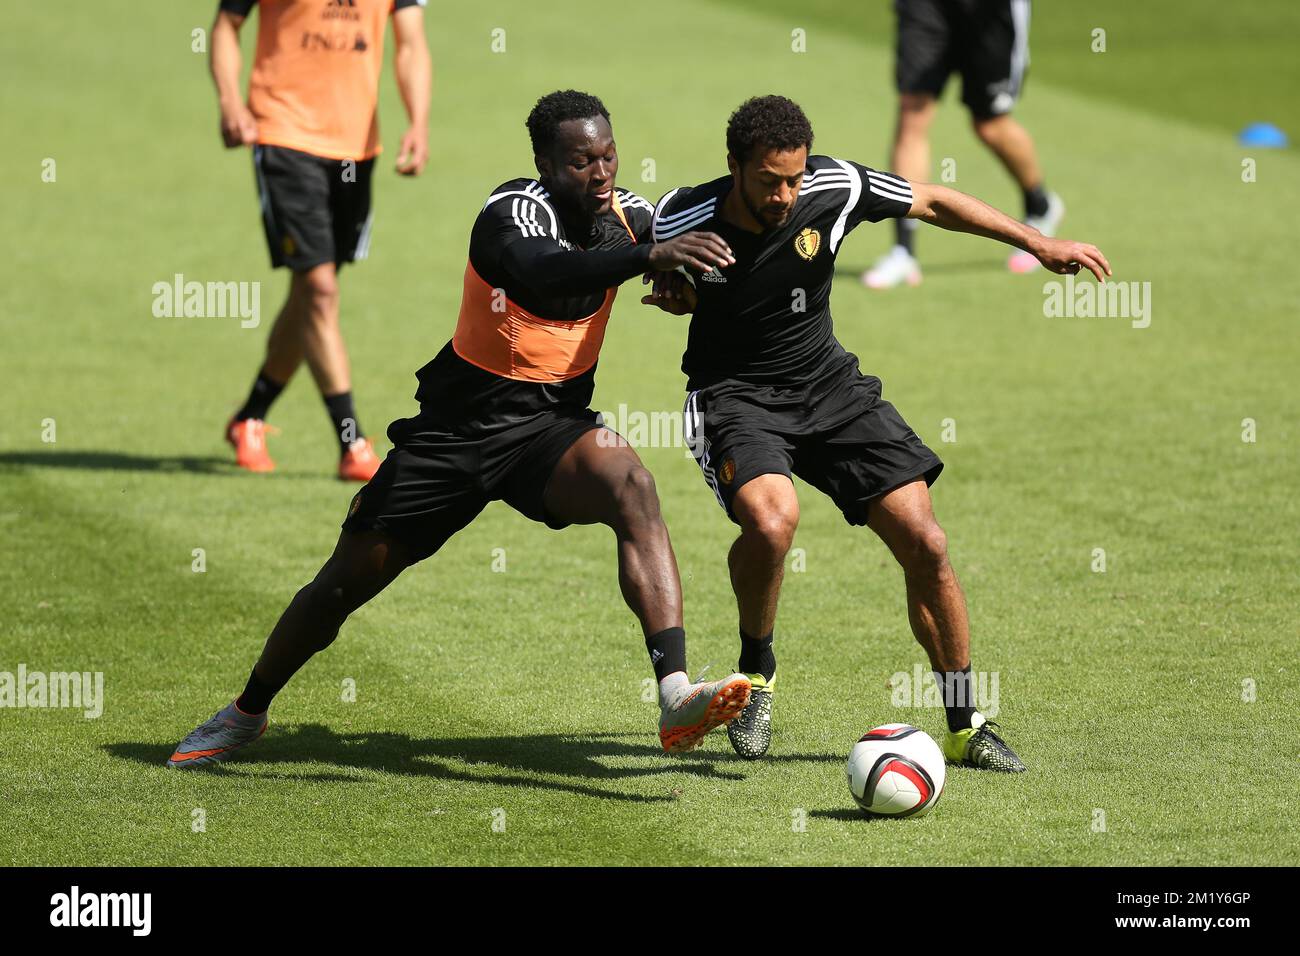 20150609 - BRUSSELS, BELGIUM: Belgium's Romelu Lukaku and Belgium's Moussa Dembele pictured during a training session of the Belgian national soccer team The Red Devils in Brussels, Tuesday 09 June 2015. The Devils are preparing for a Euro 2016 qualification game against Wales. BELGA PHOTO BRUNO FAHY Stock Photo